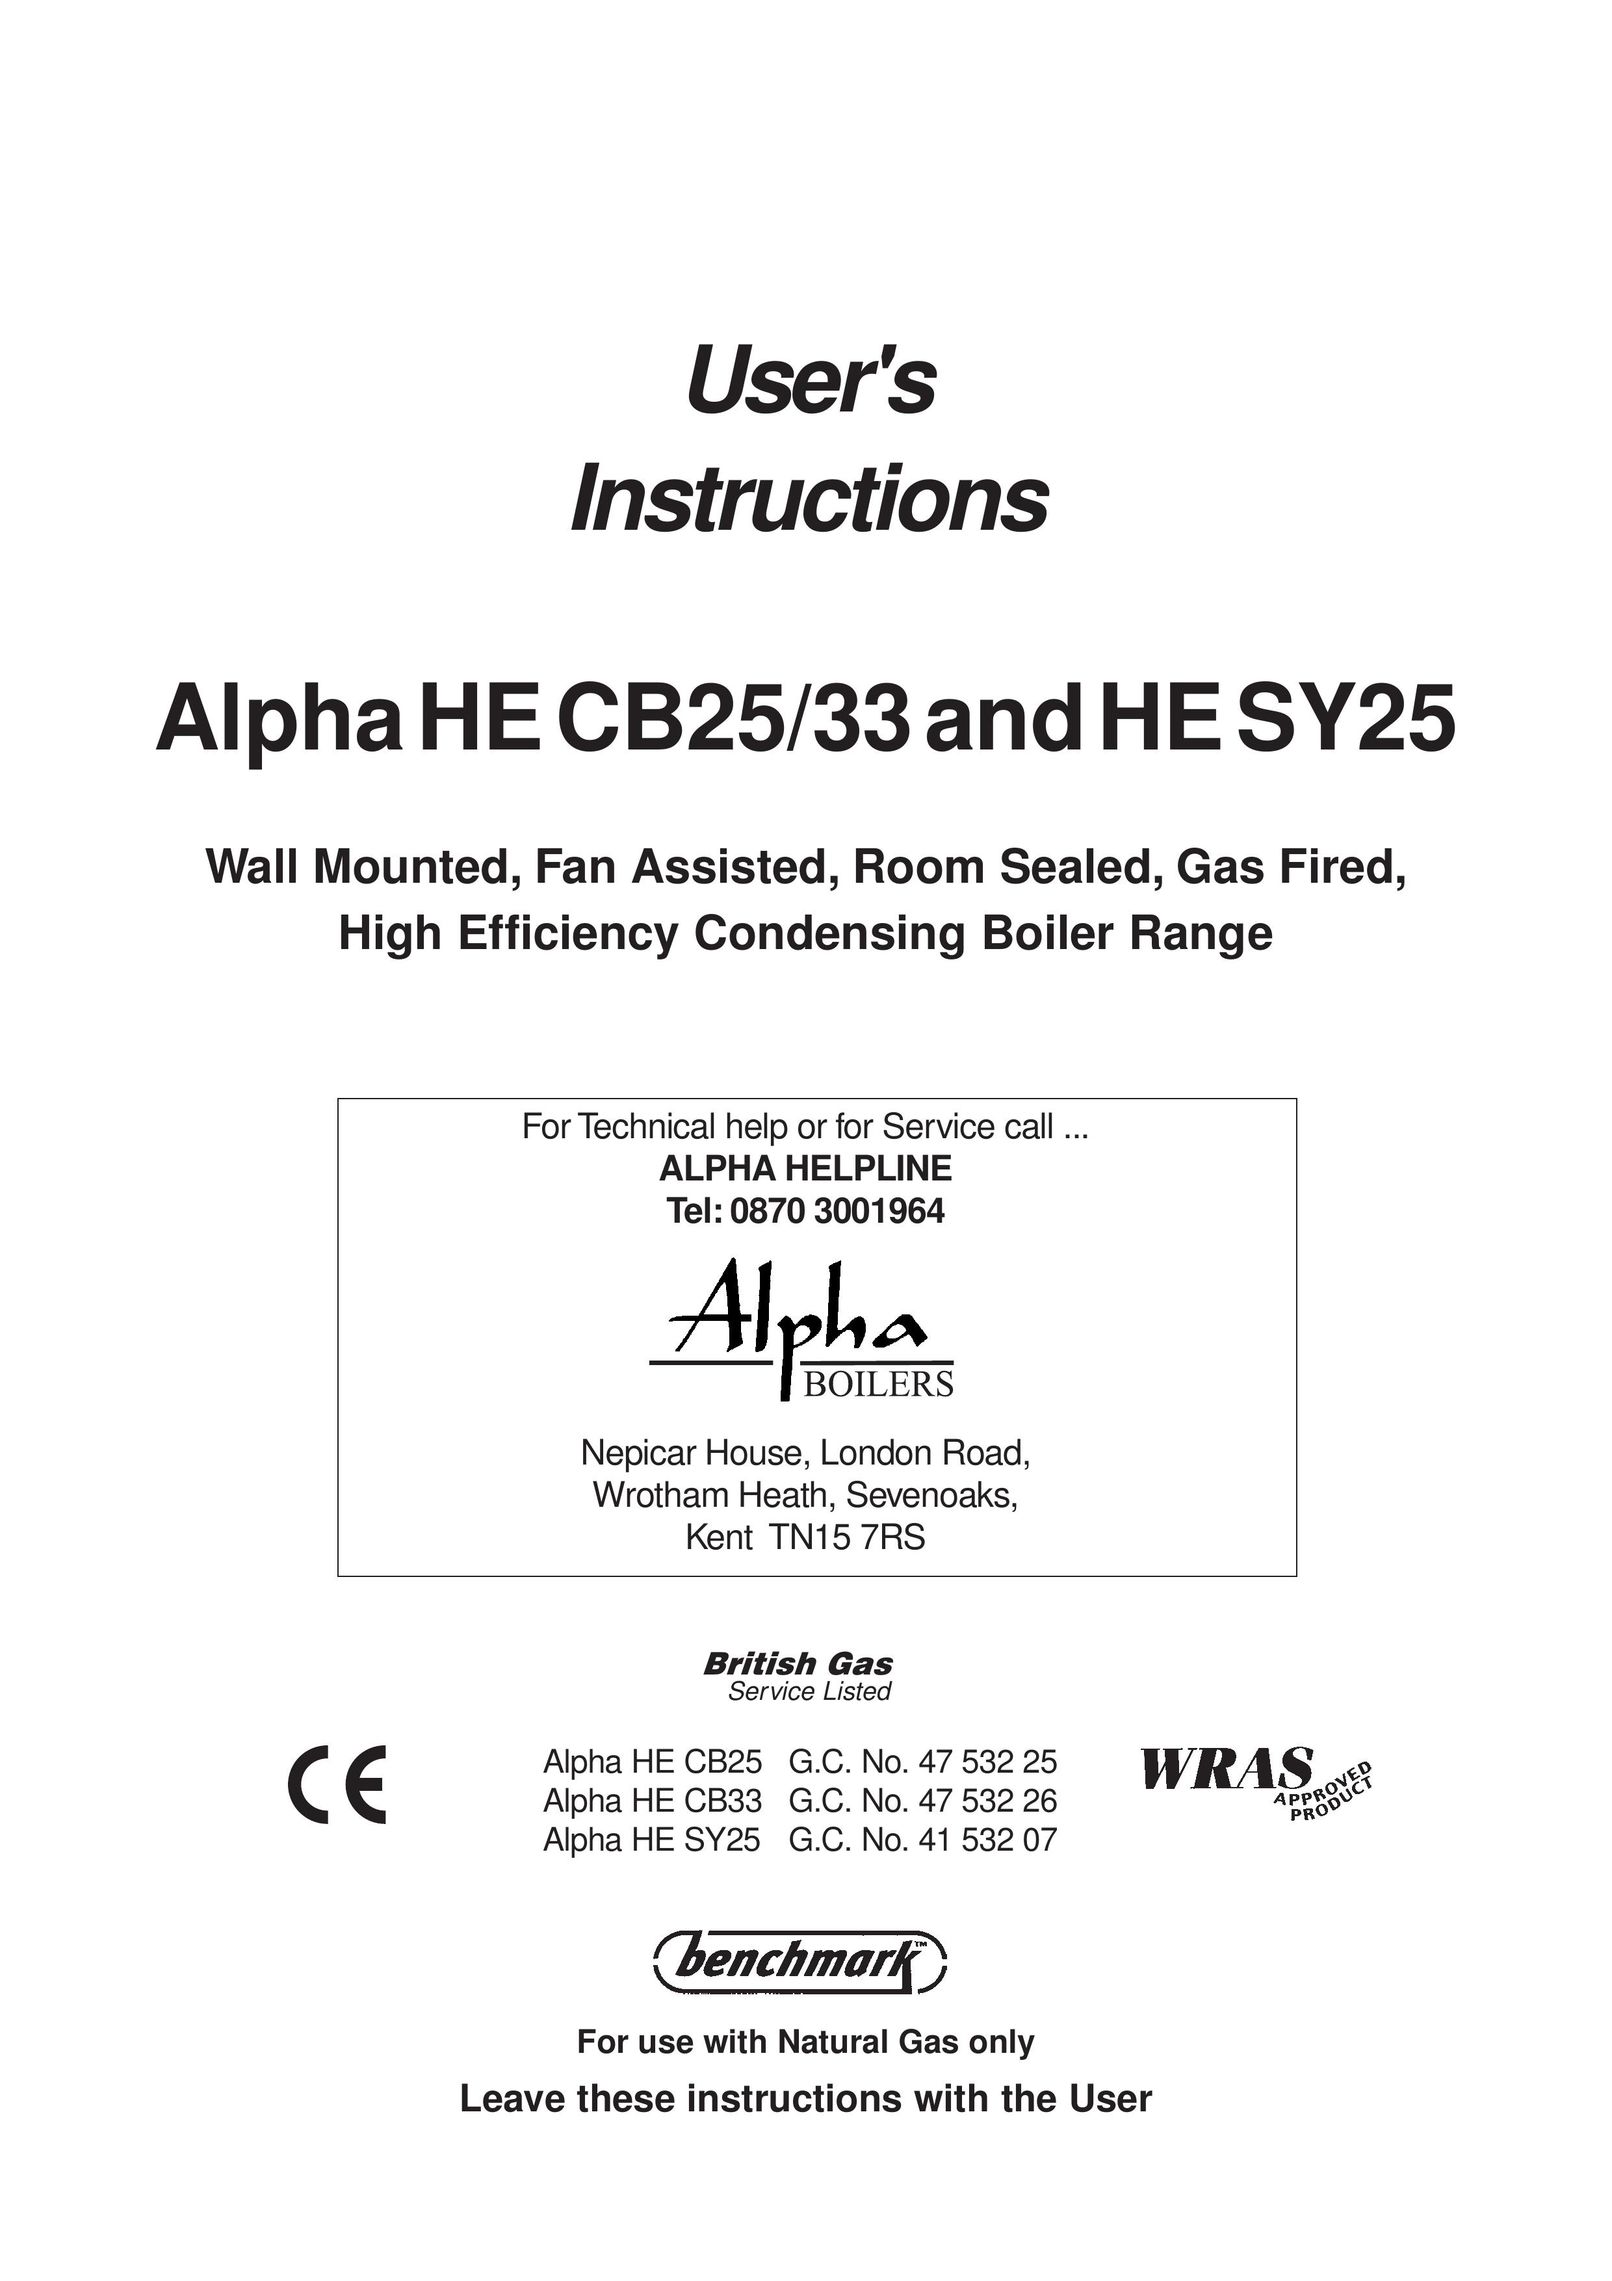 Alpha Tool.Com.HK Limited HE SY25 Boiler User Manual (Page 1)